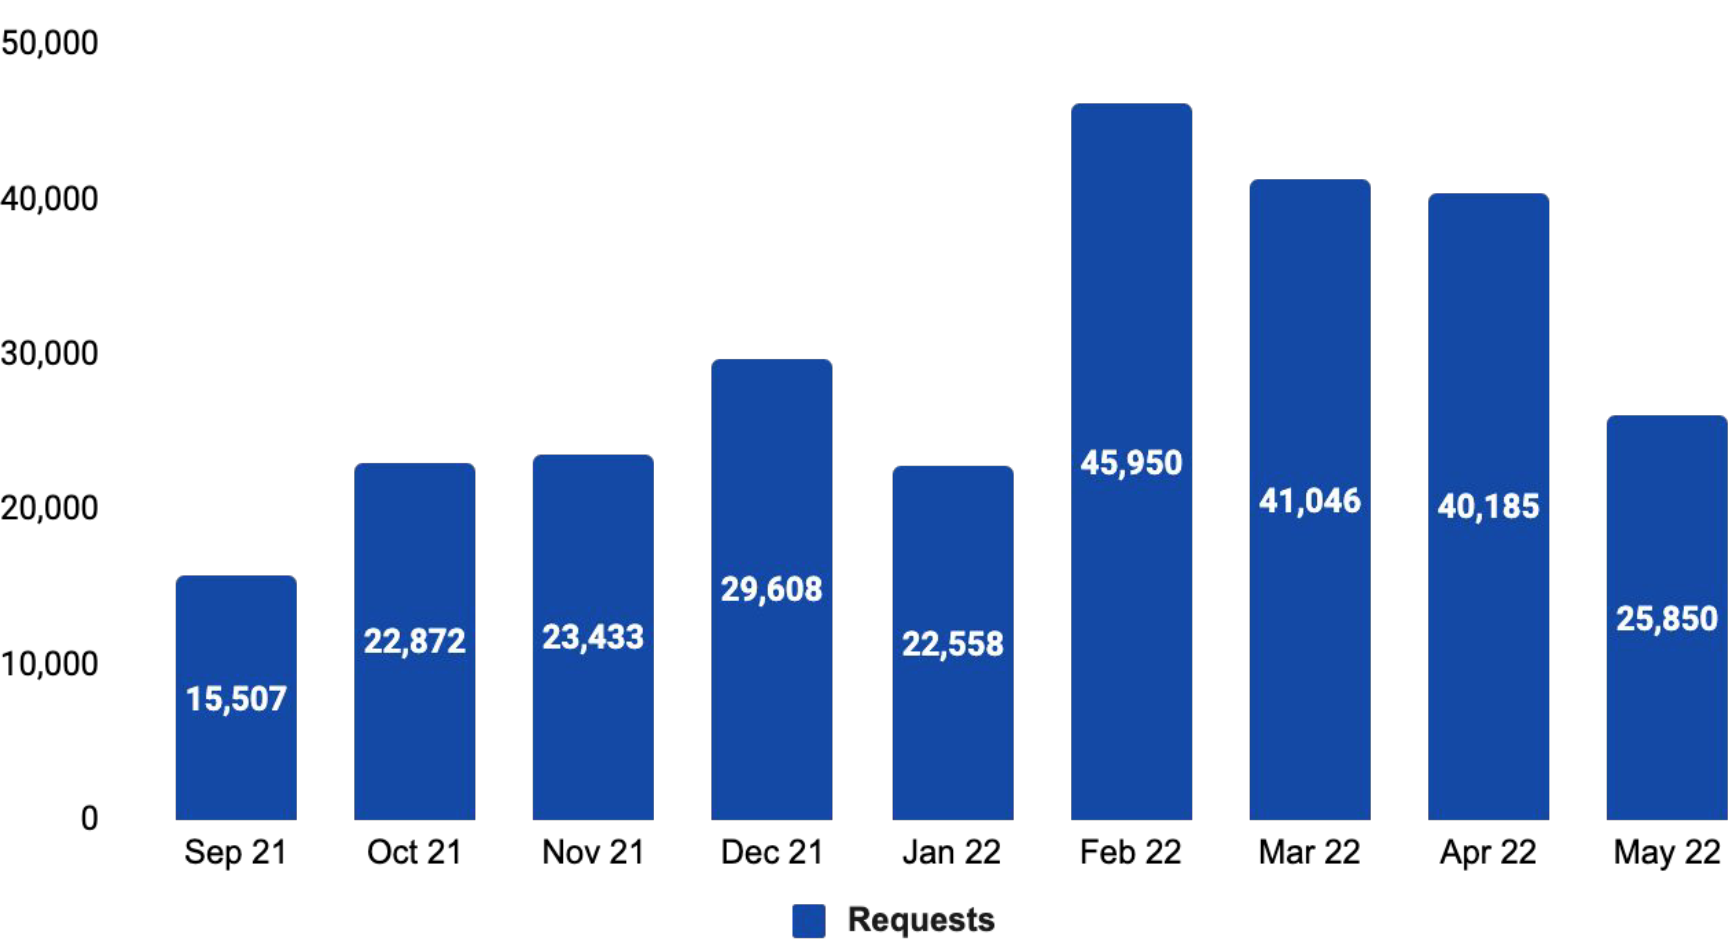 Graph showing the increasing number of ride requests per month over the course of September to May